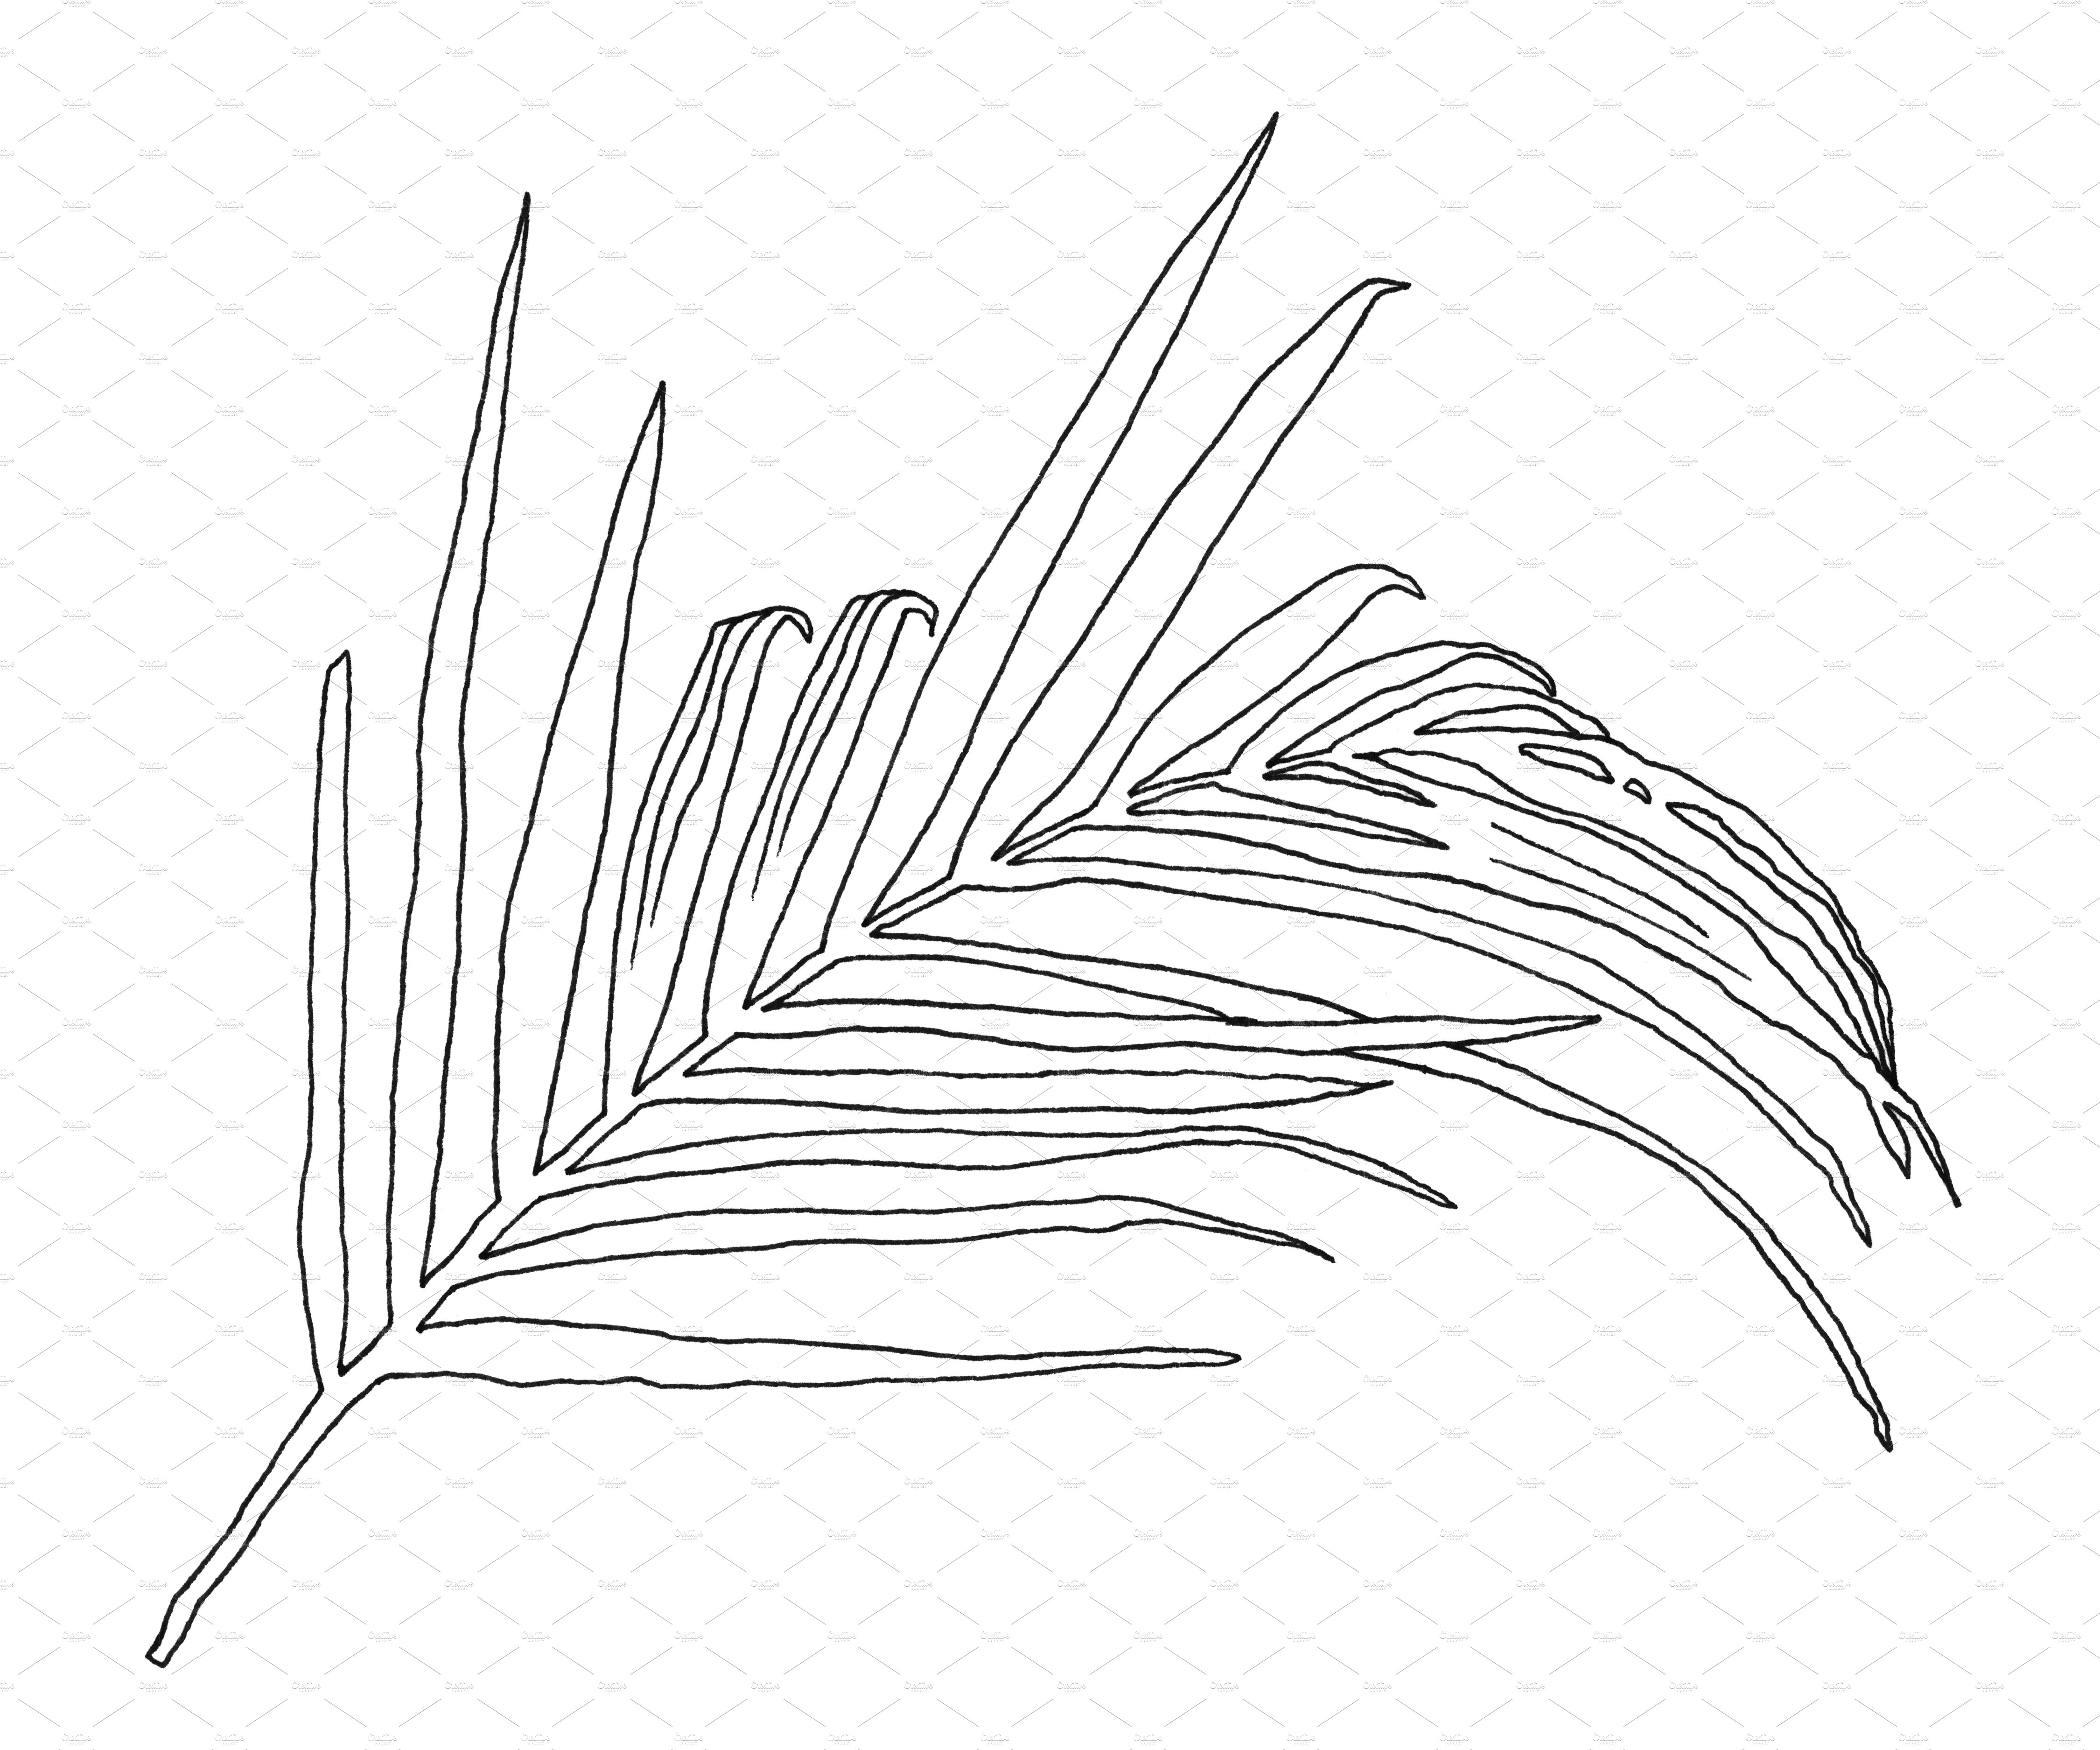 Black and white drawing of a palm leaf.